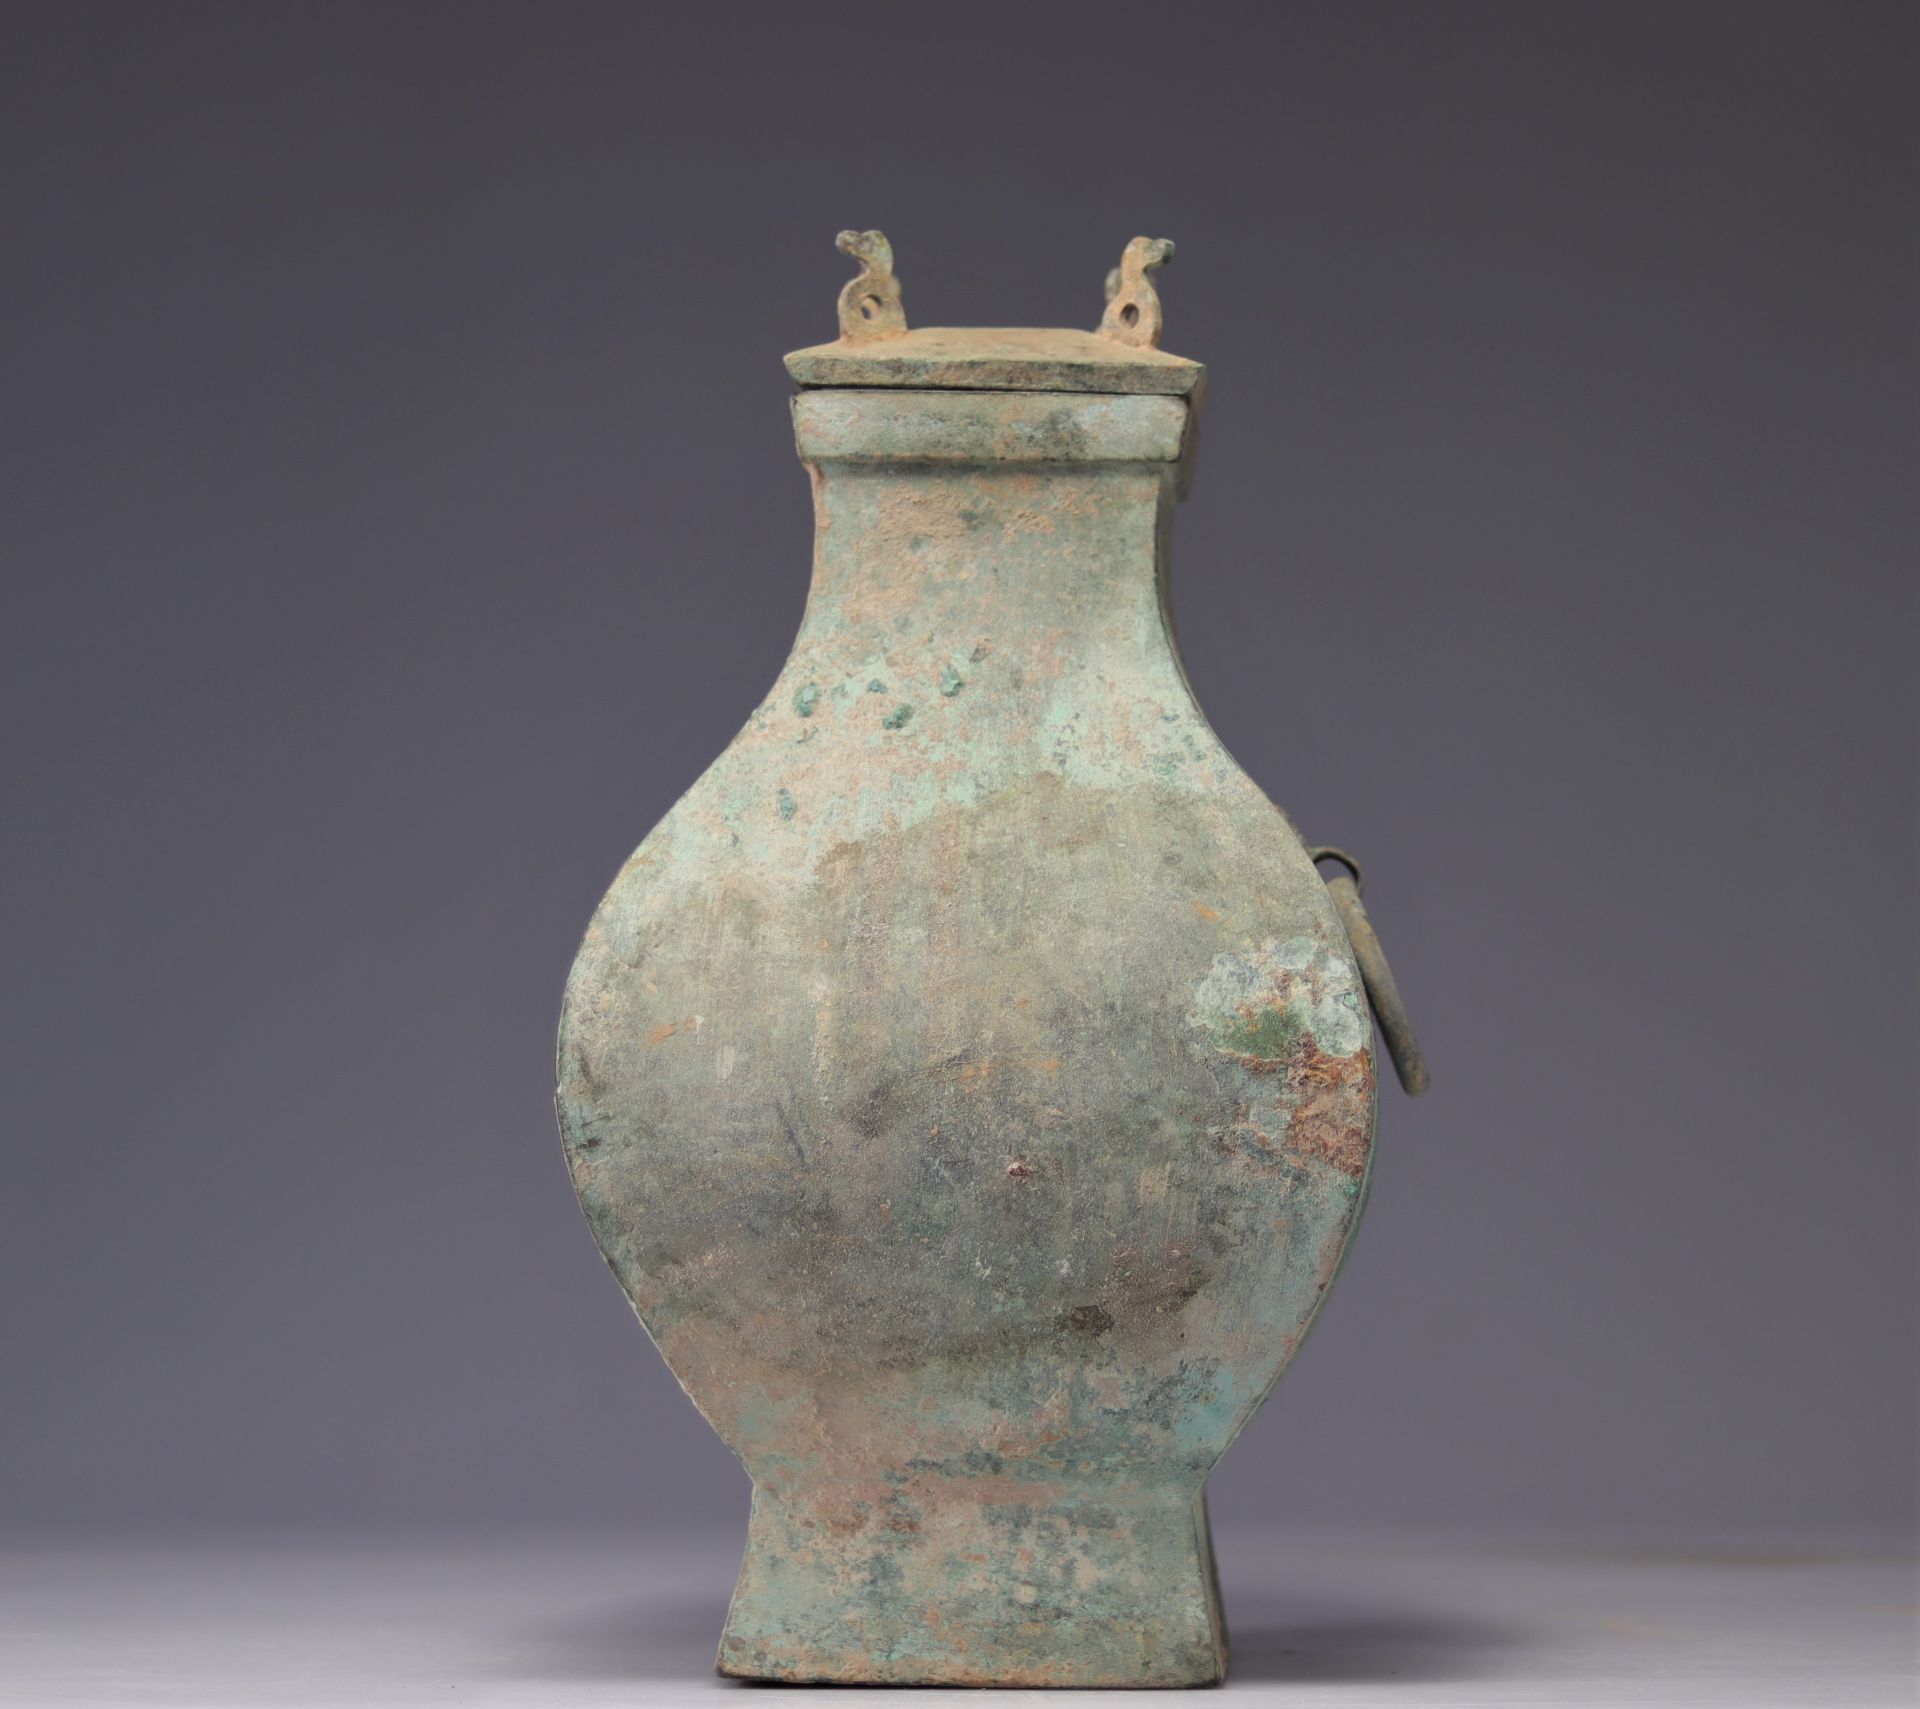 HAN DYNASTY (206 BC-220 AD) Bronze fanghu covered vase with excavation patina - Image 3 of 4